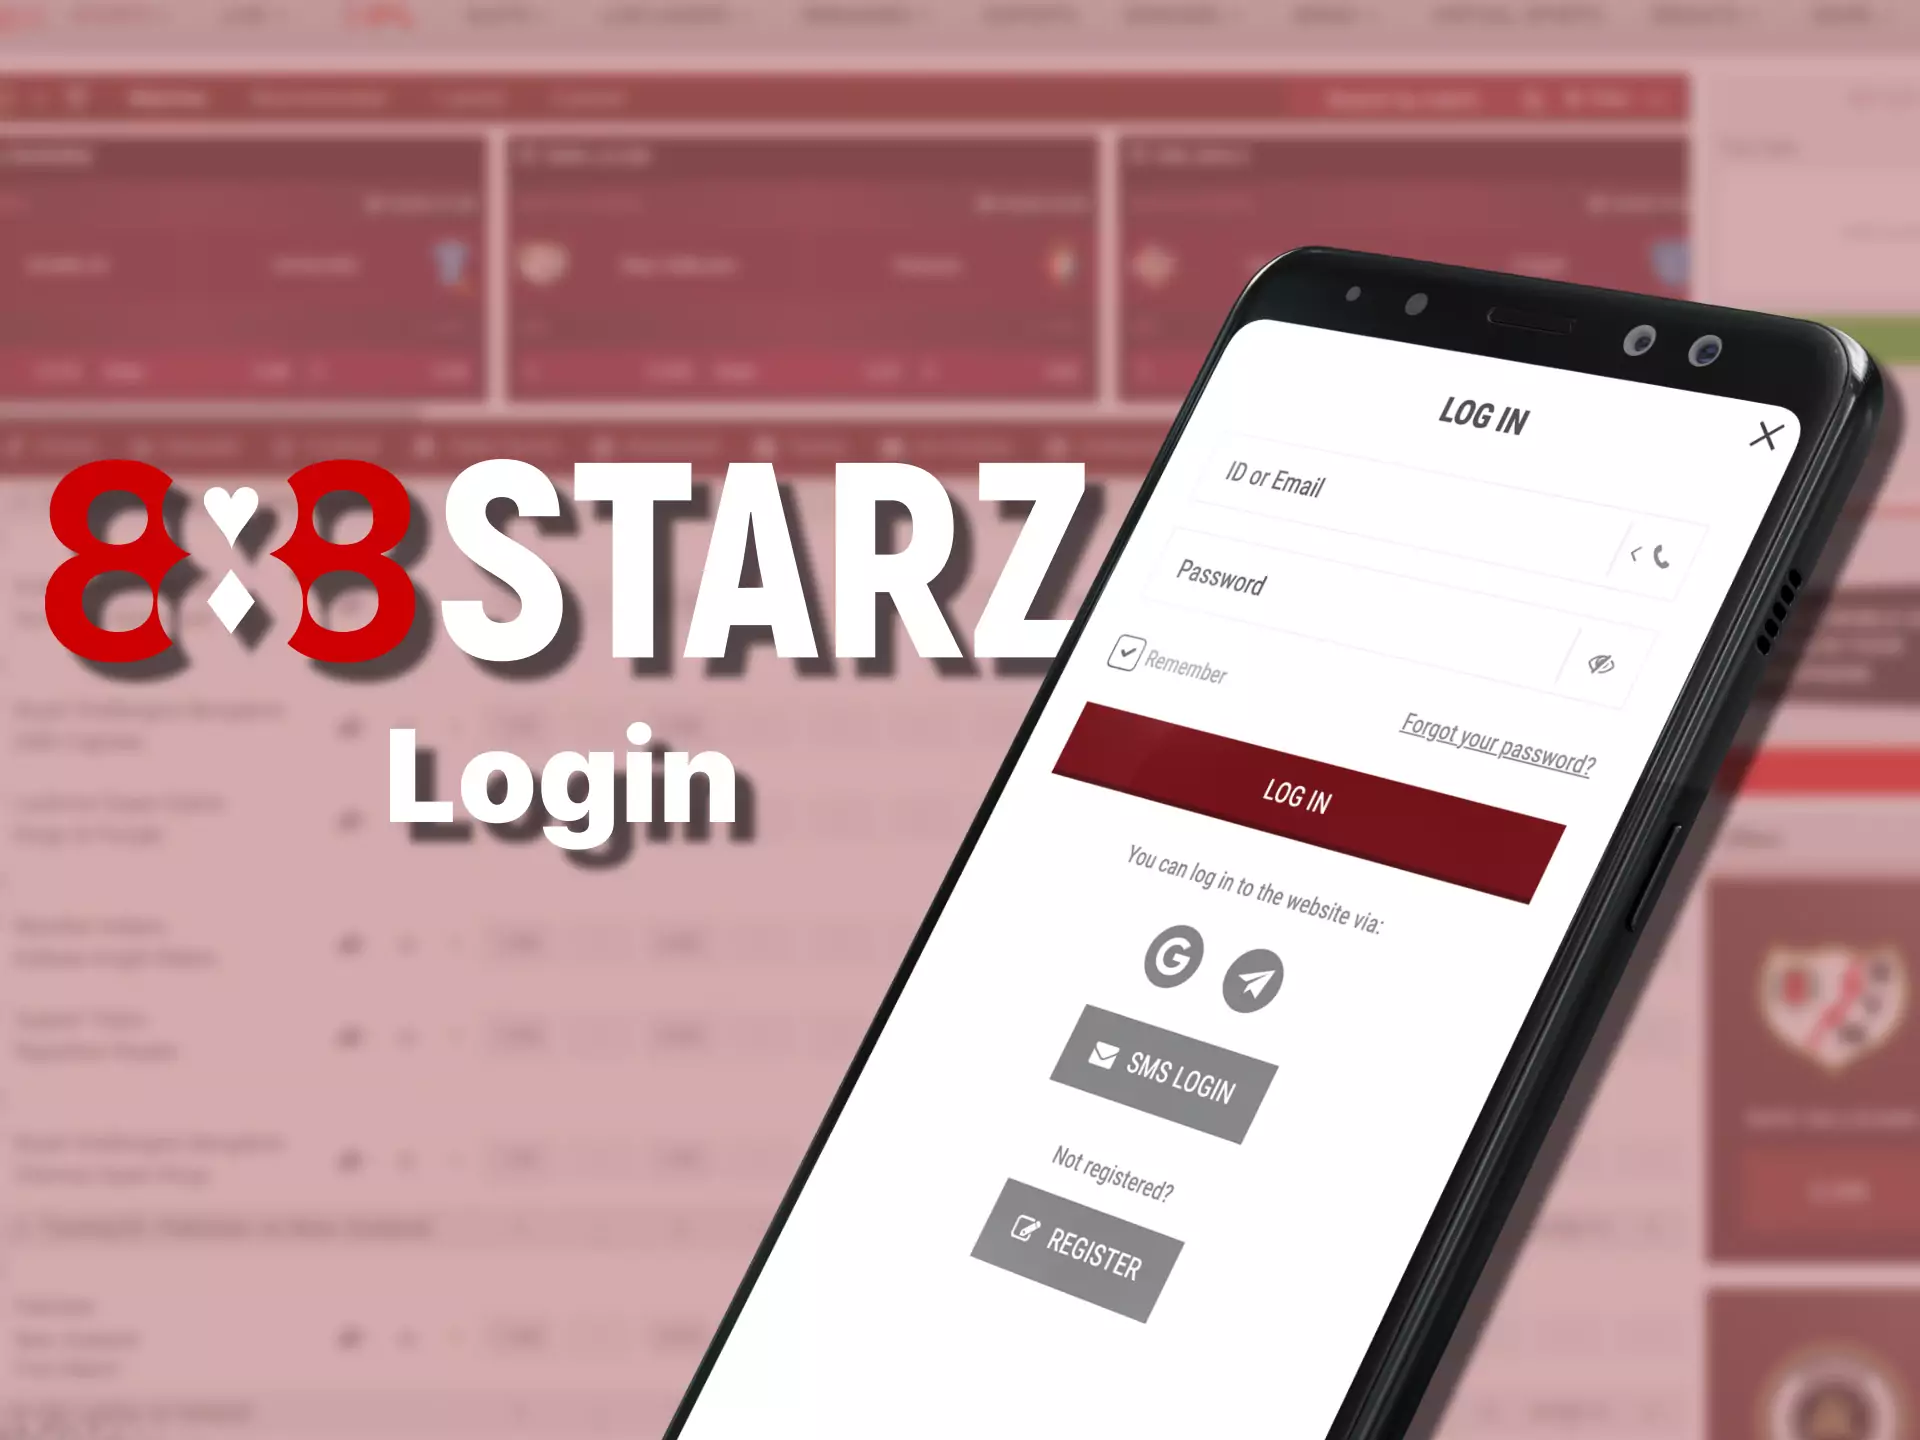 Login to your account in the 888starz app for betting and casino games.